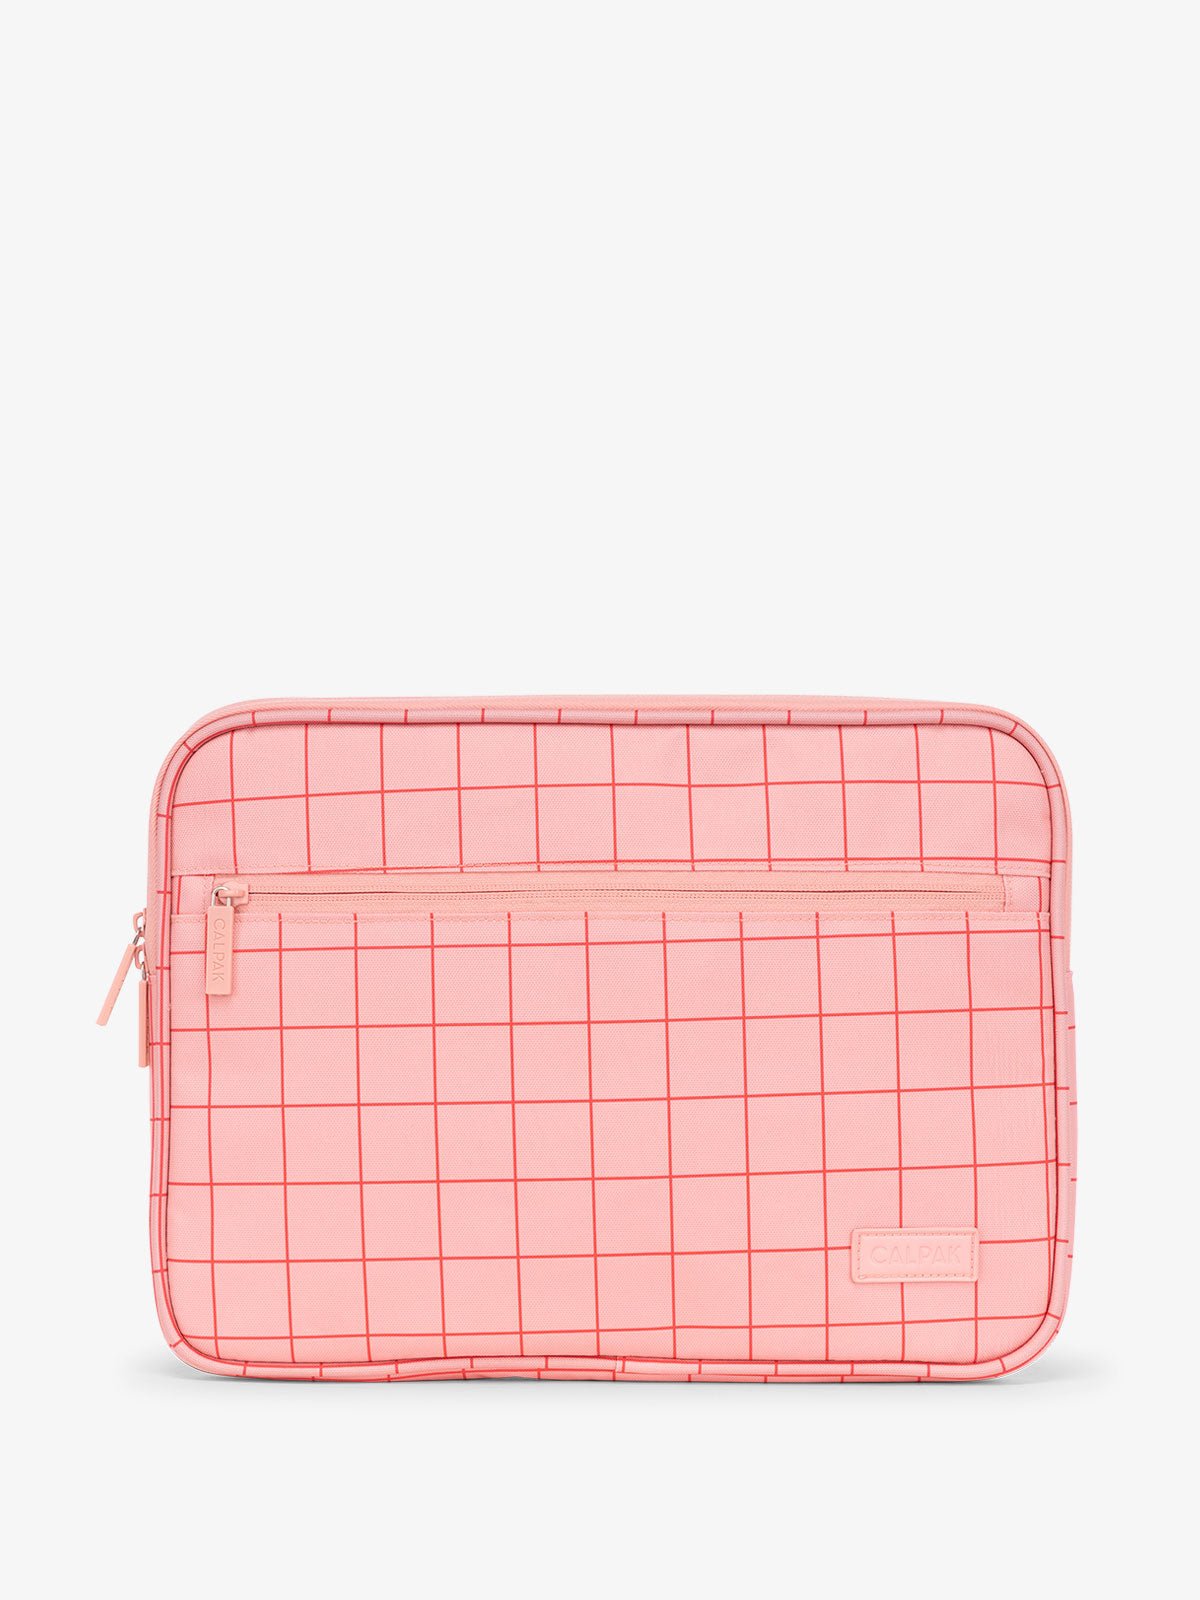 CALPAK 13-14 Inch Laptop Case with zippered front pocket in pink grid